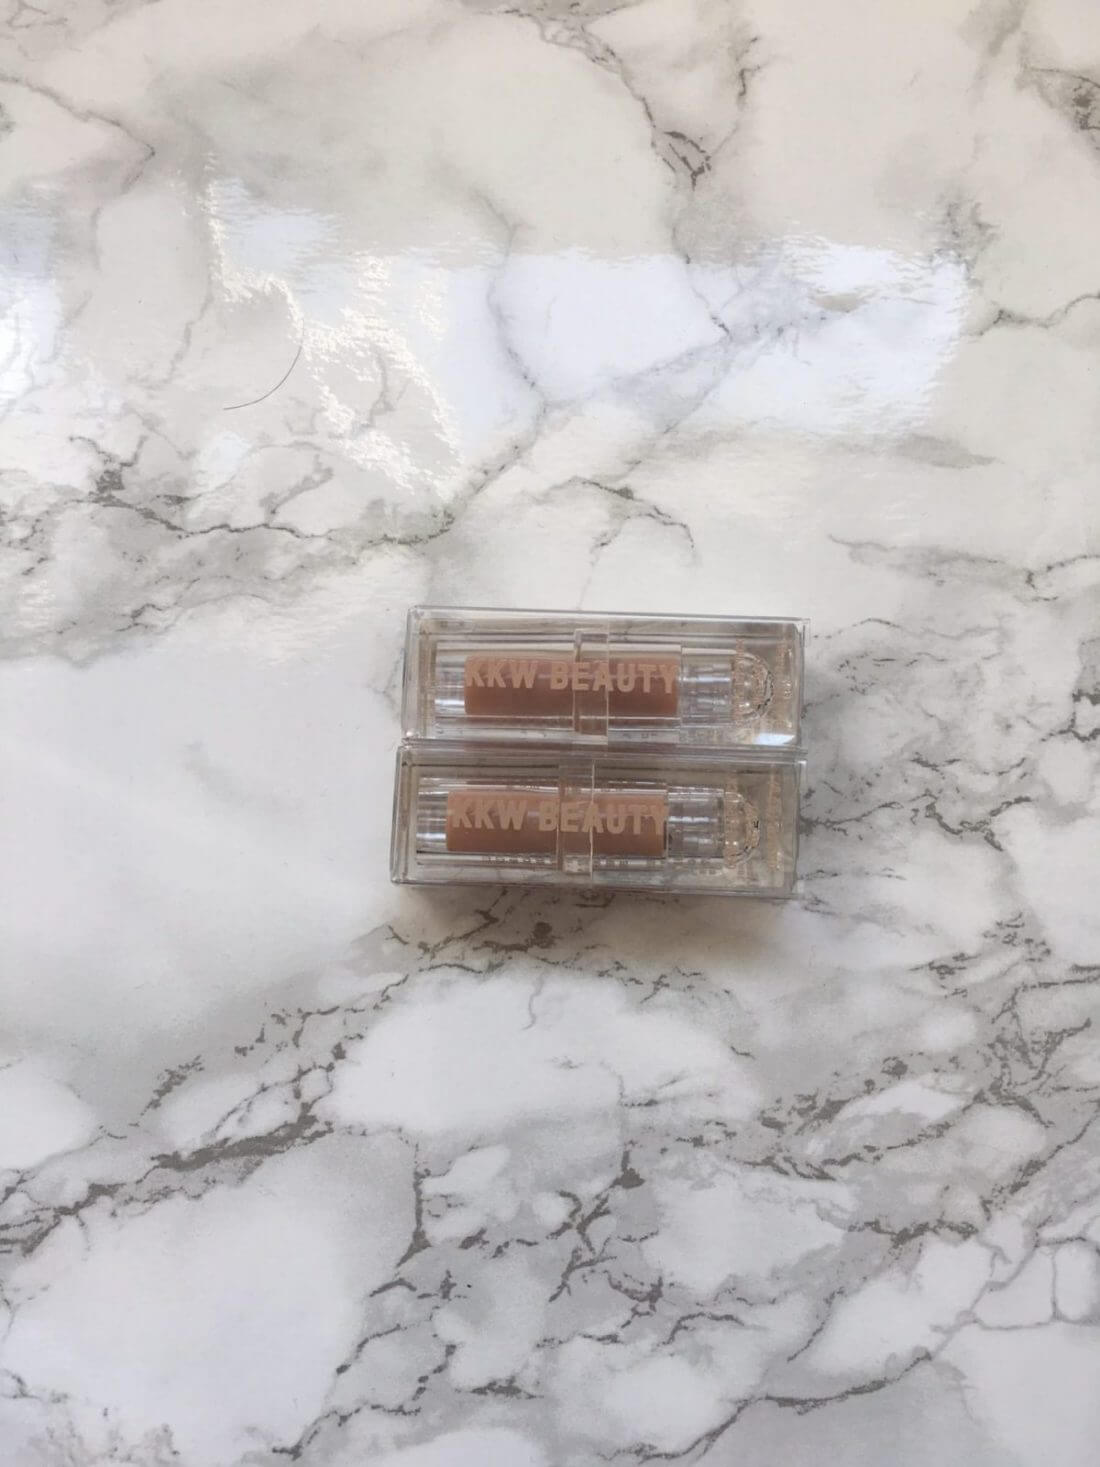 Kkw Beauty Classic Collection